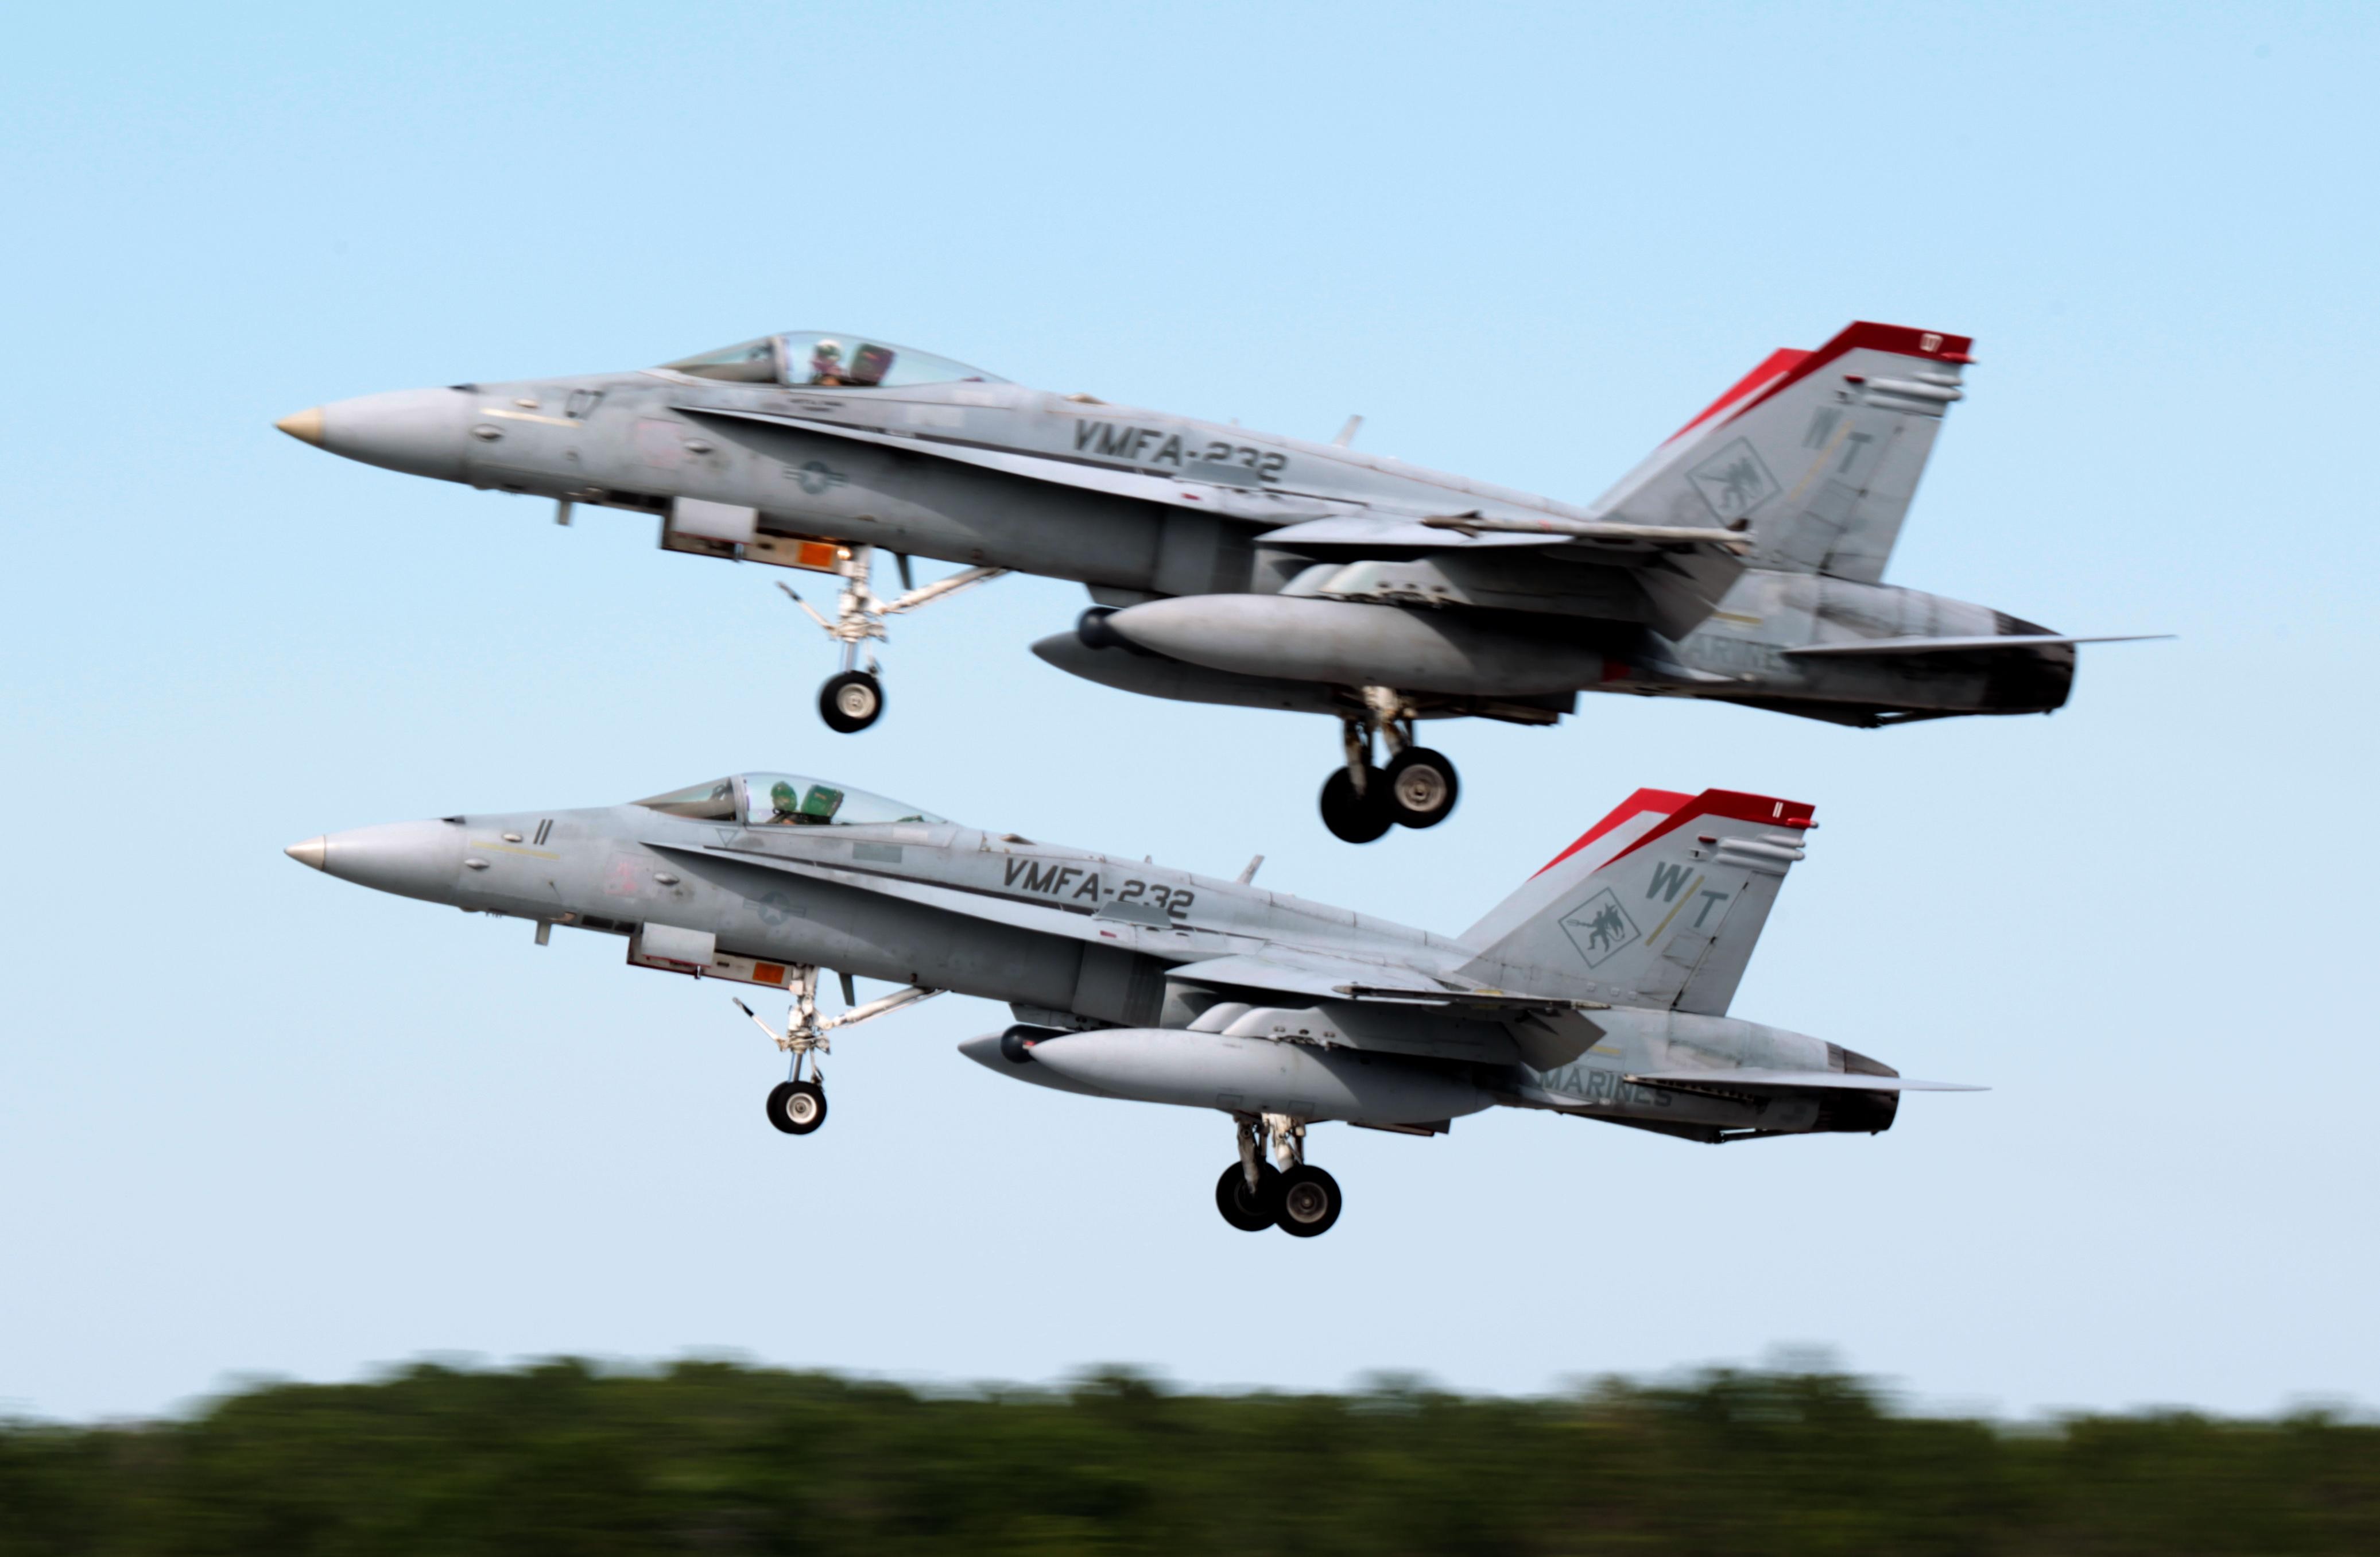 Marine Fighter Attack Squadron (VMFA) 232, Marine Aircraft Group 11, 3rd Marine Aircraft Wing fly F/A-18C Hornet airplanes during deployment for training on Tyndall Air Force Base, Fla., May 13, 2013. US Marine Corps photo.